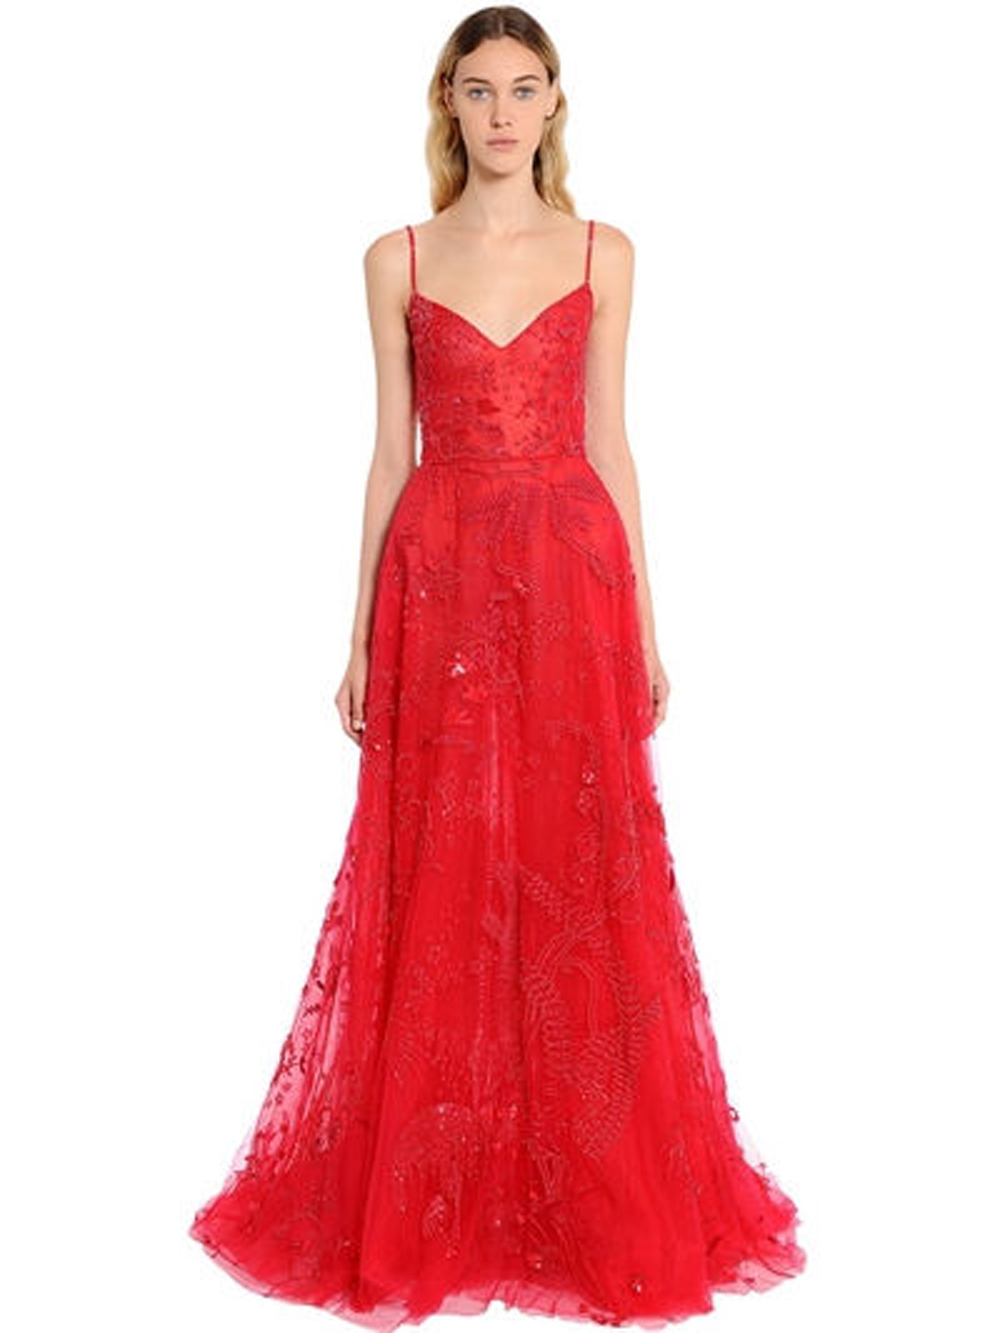 ZUHAIR MURAD BEADED TULLE FLORAL GOWN 